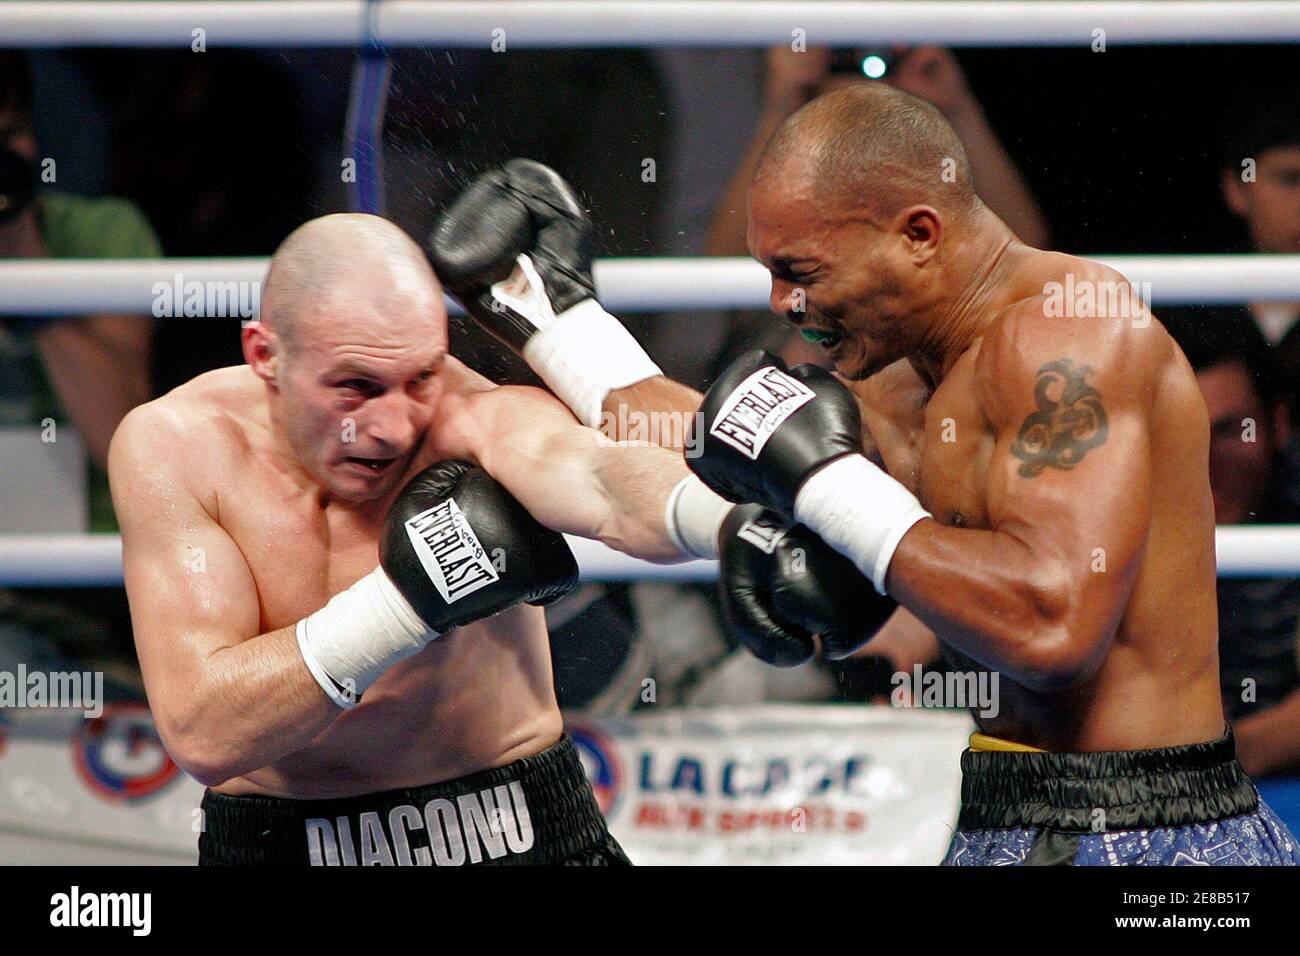 Boxers Adrian Diaconu (L) of Romania and Chris Henry of the U.S. fight  during their interim WBC light heavyweight title match in Bucharest April  19, 2008. REUTERS/Mihai Barbu (ROMANIA Stock Photo - Alamy